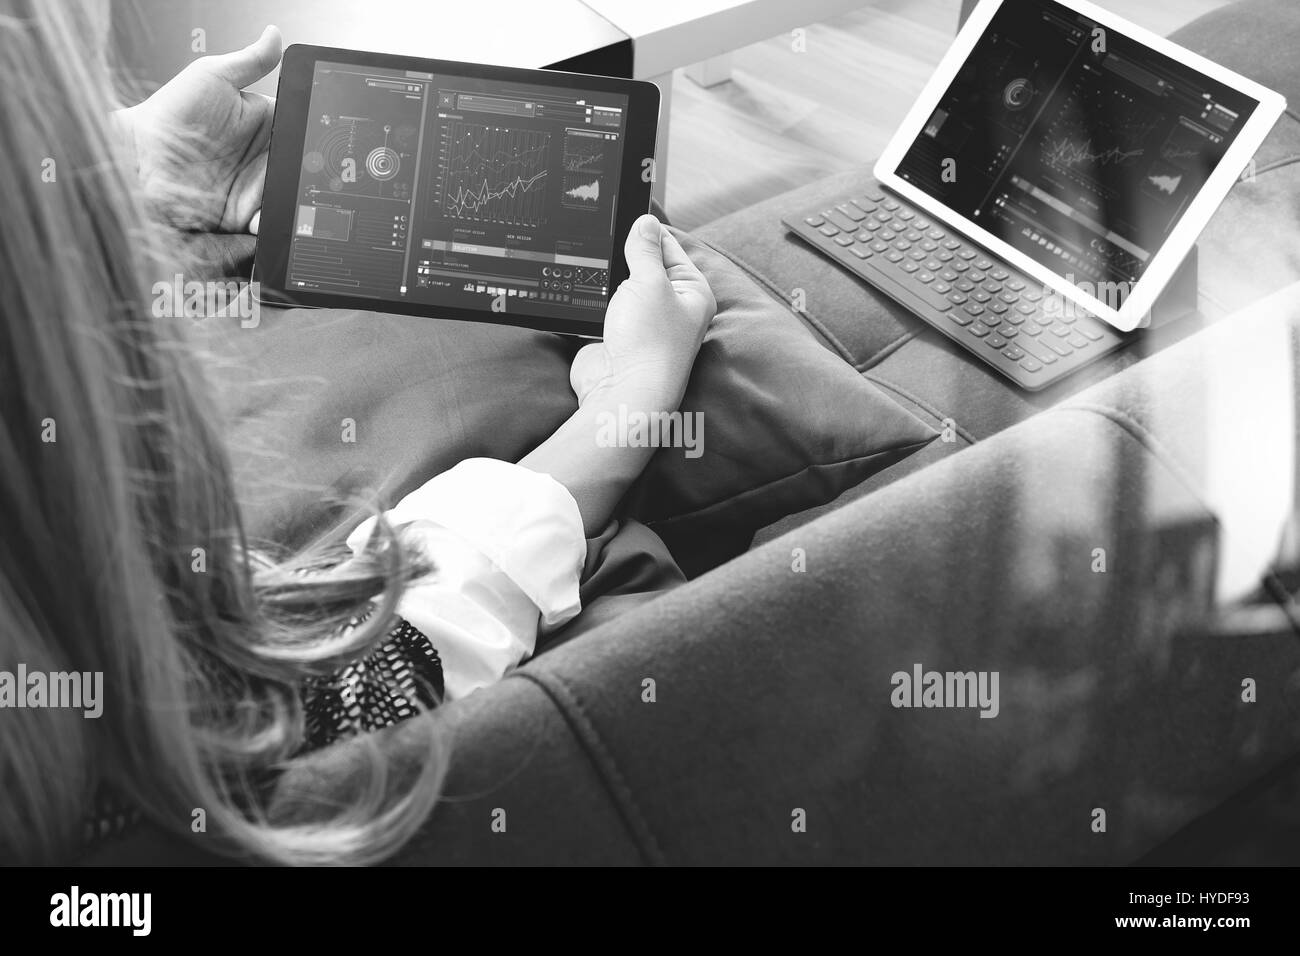 brunette woman using digital talet and laptop computer on sofa in living room,black and white Stock Photo